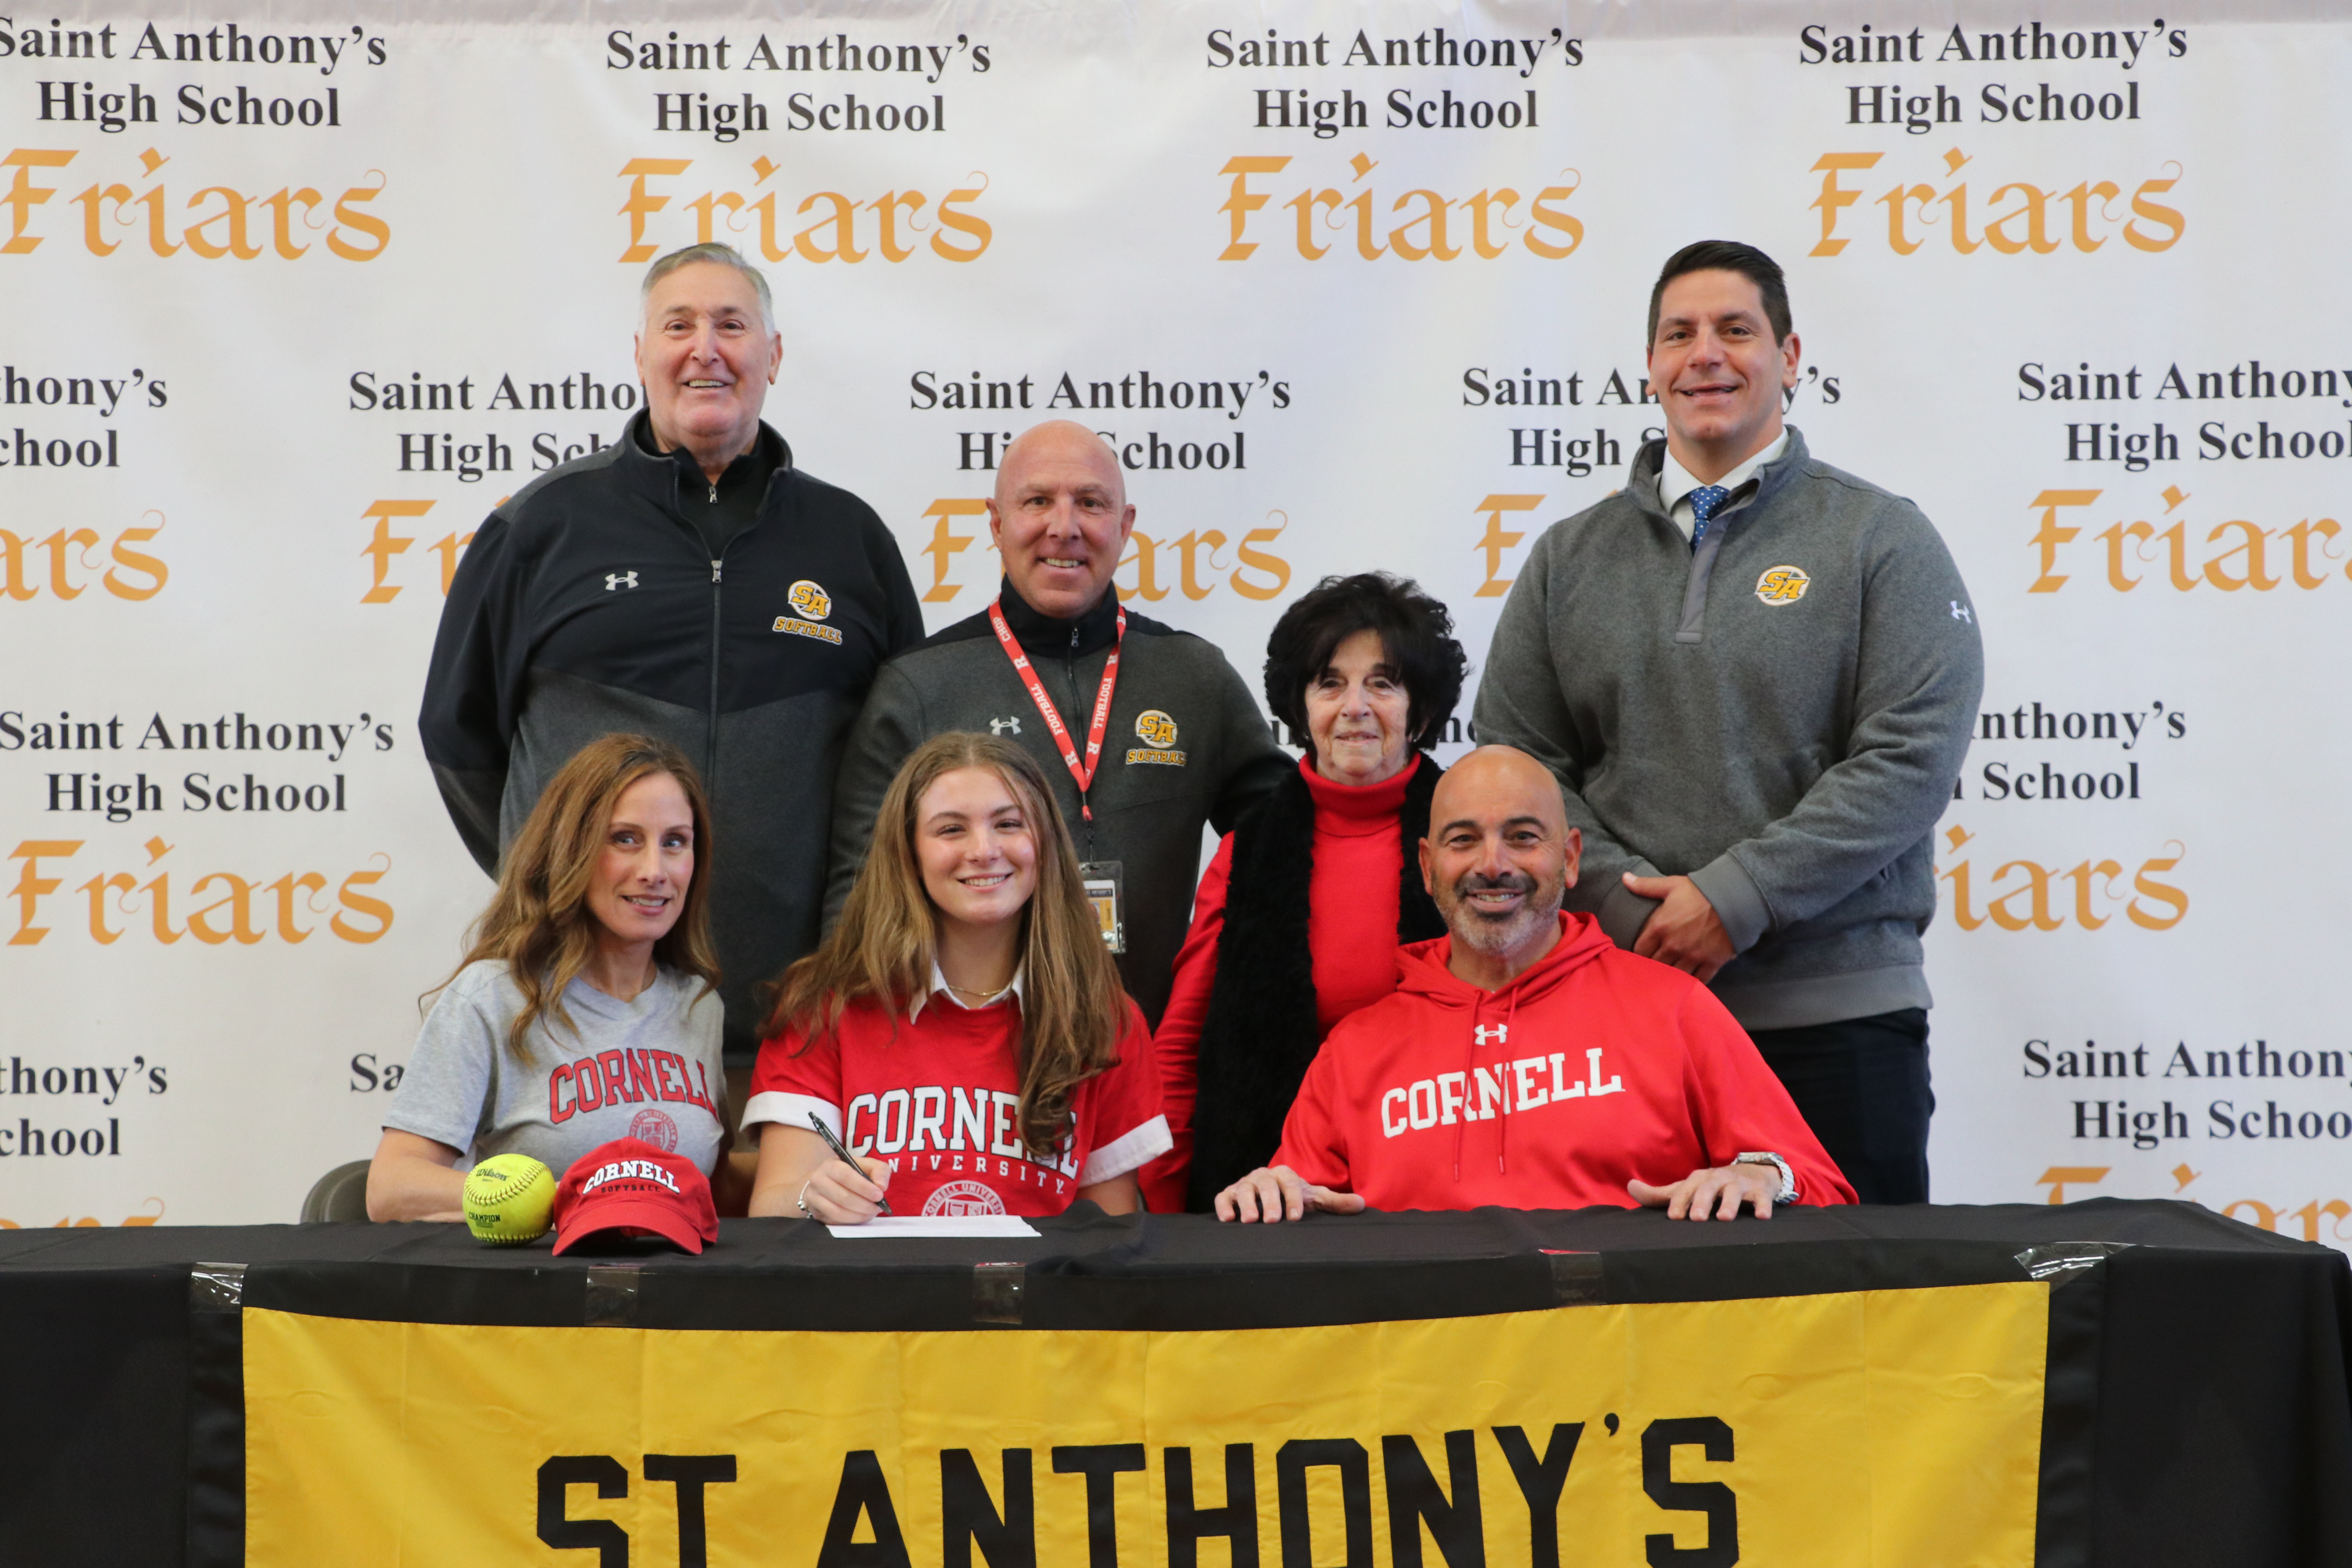 Milana Fiordalisi committed to Cornell University - CONGRATULATIONS